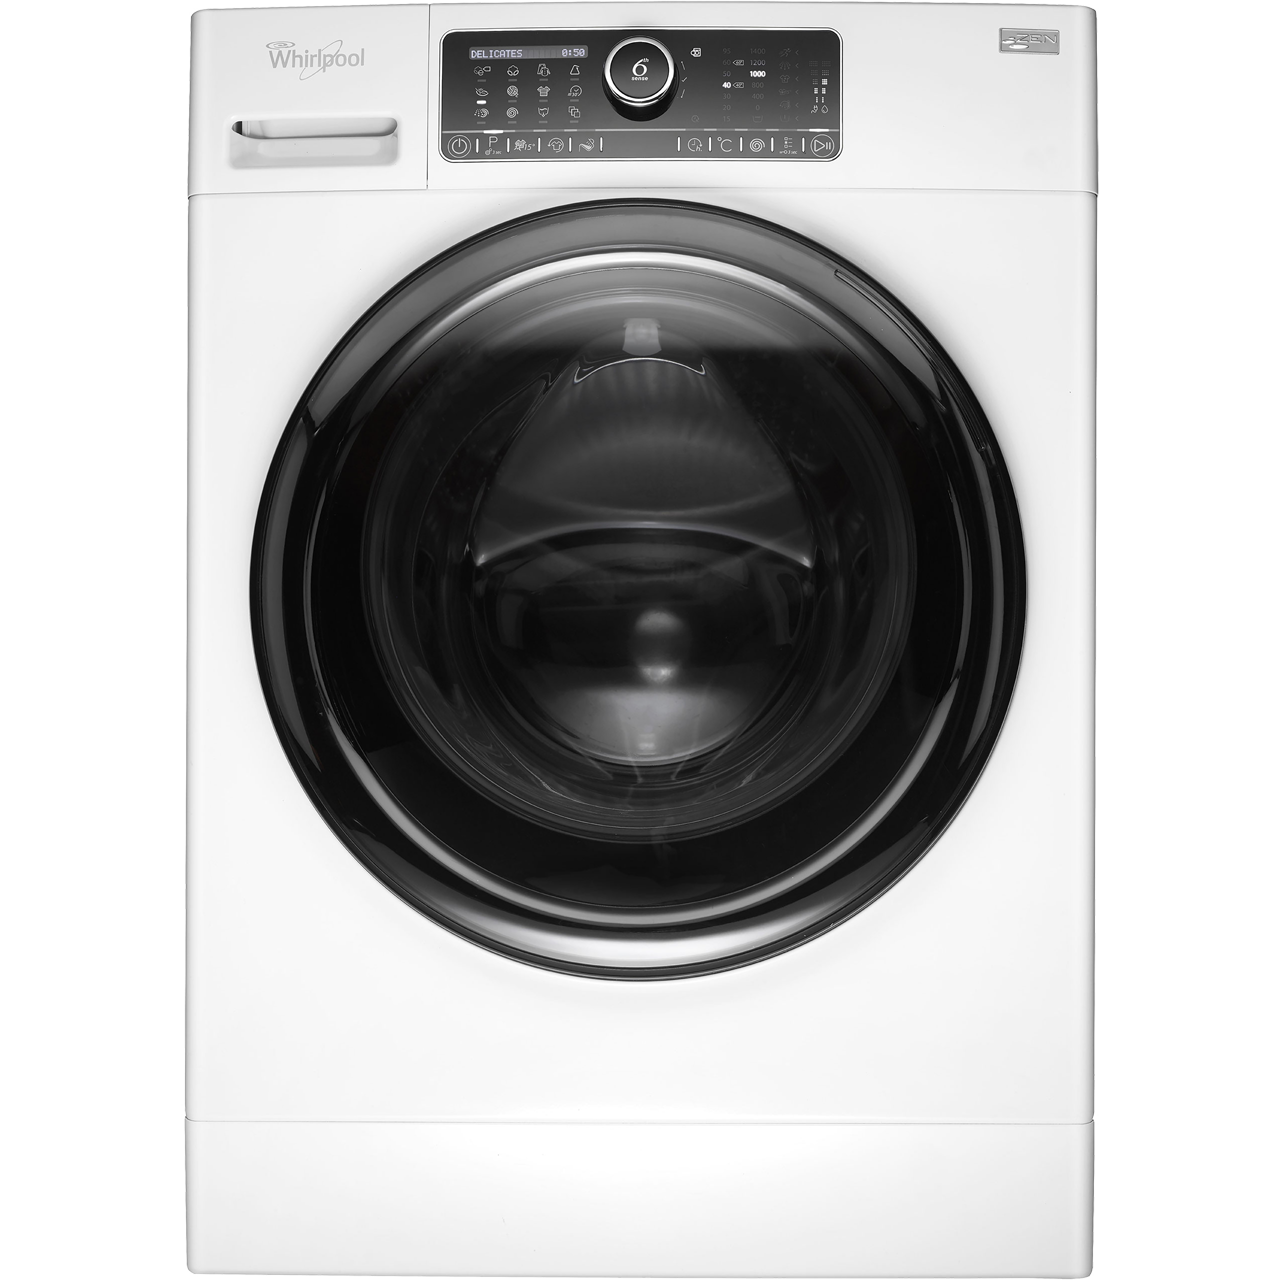 Whirlpool FSCR12430 12Kg Washing Machine with 1400 rpm Review